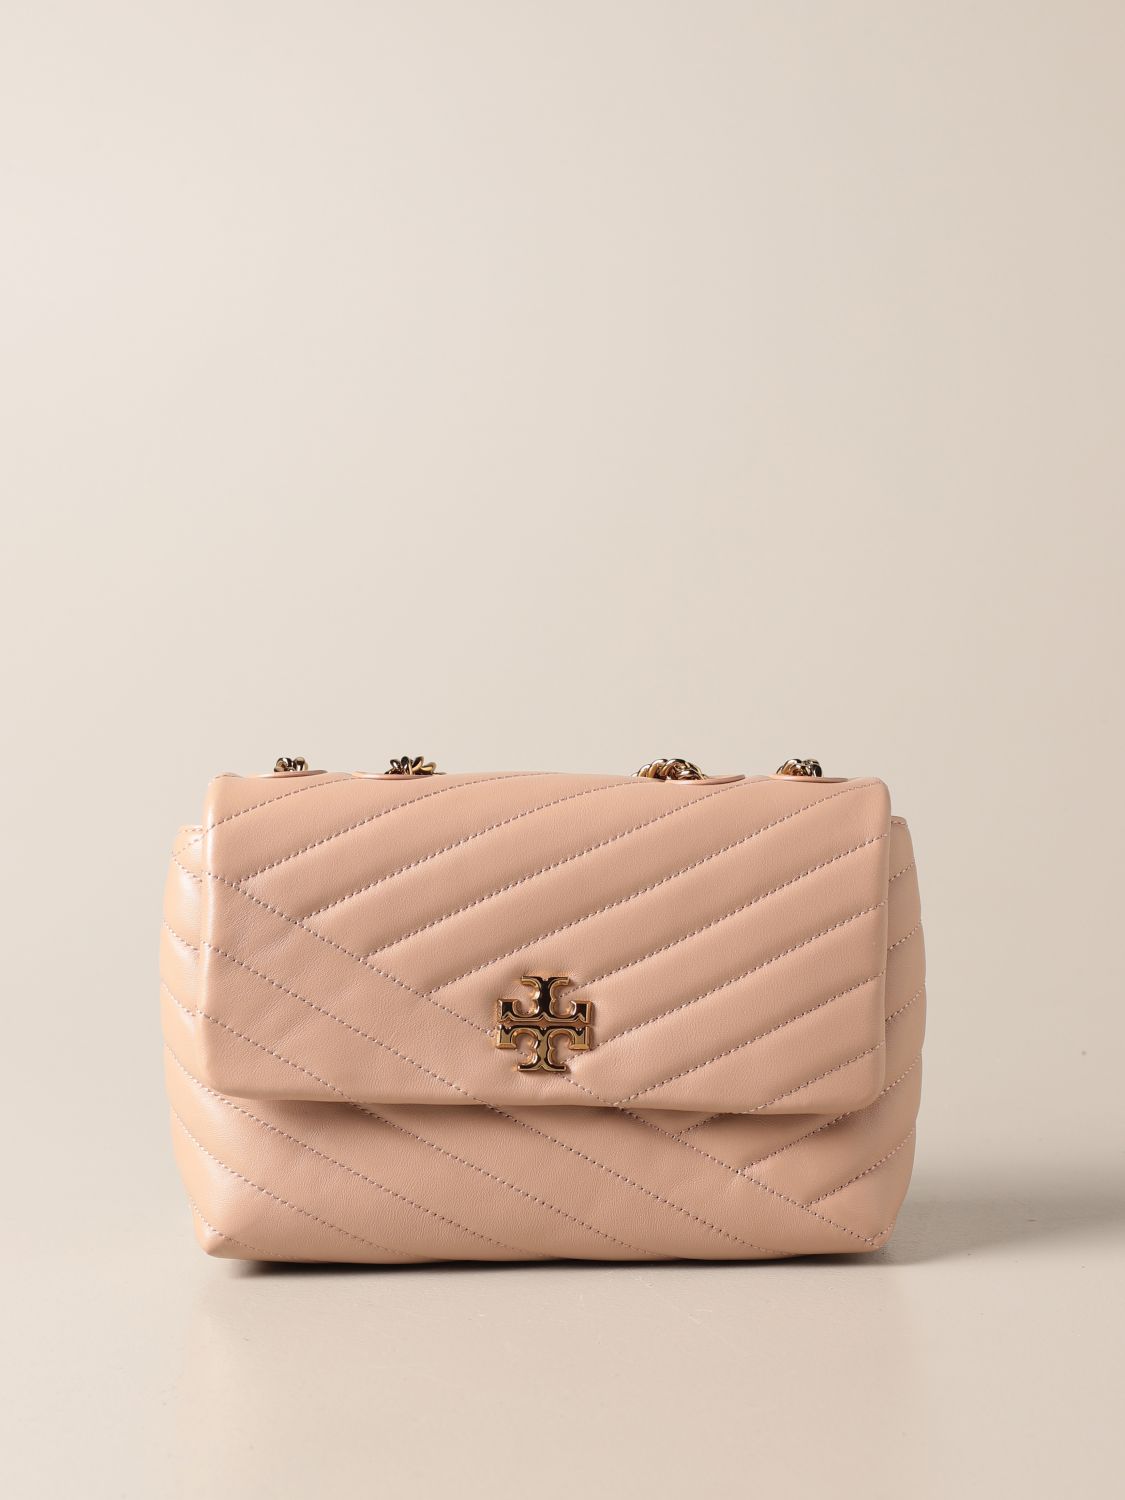 TORY BURCH: Kira bag in quilted leather - Sand | Tory Burch crossbody bags  64963 online on 